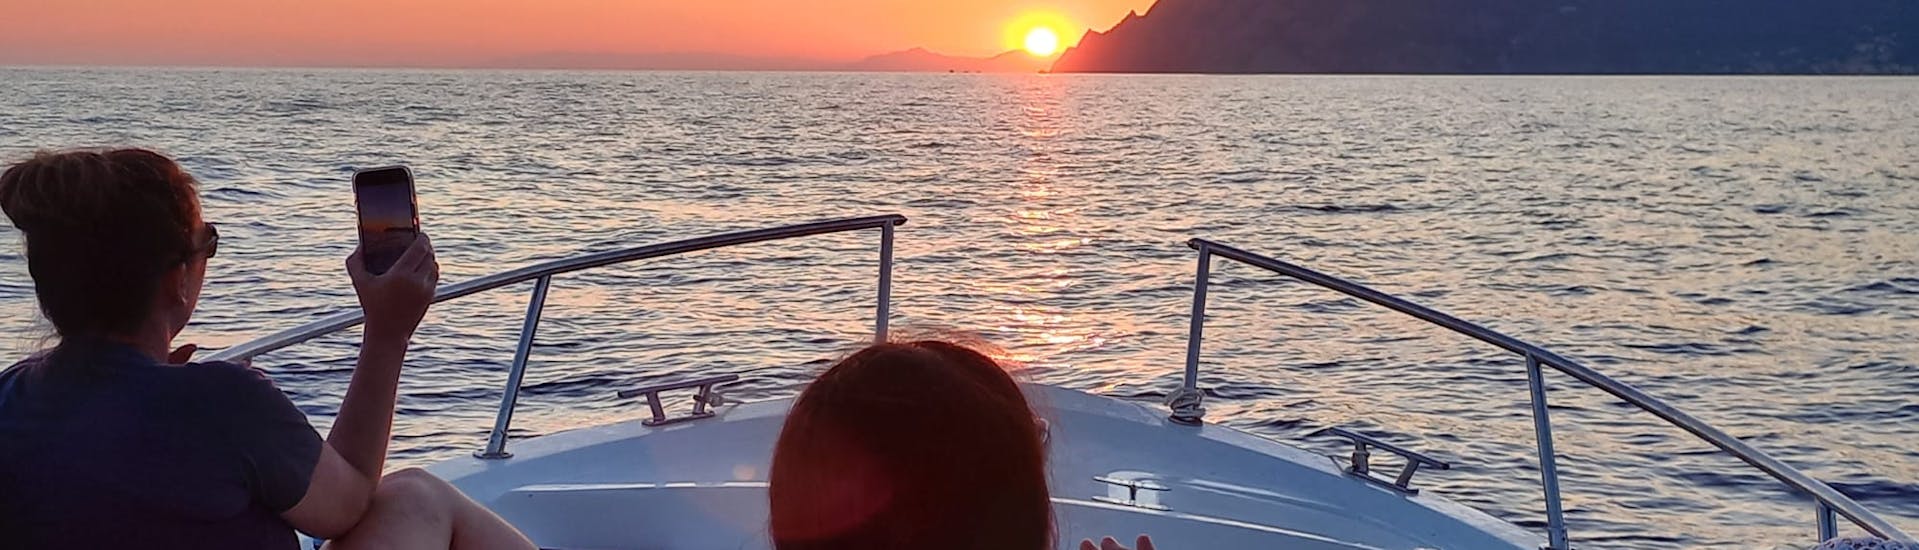 Private Sunset Boat Trip from Vernazza to Cinque Terre with Aperitif.